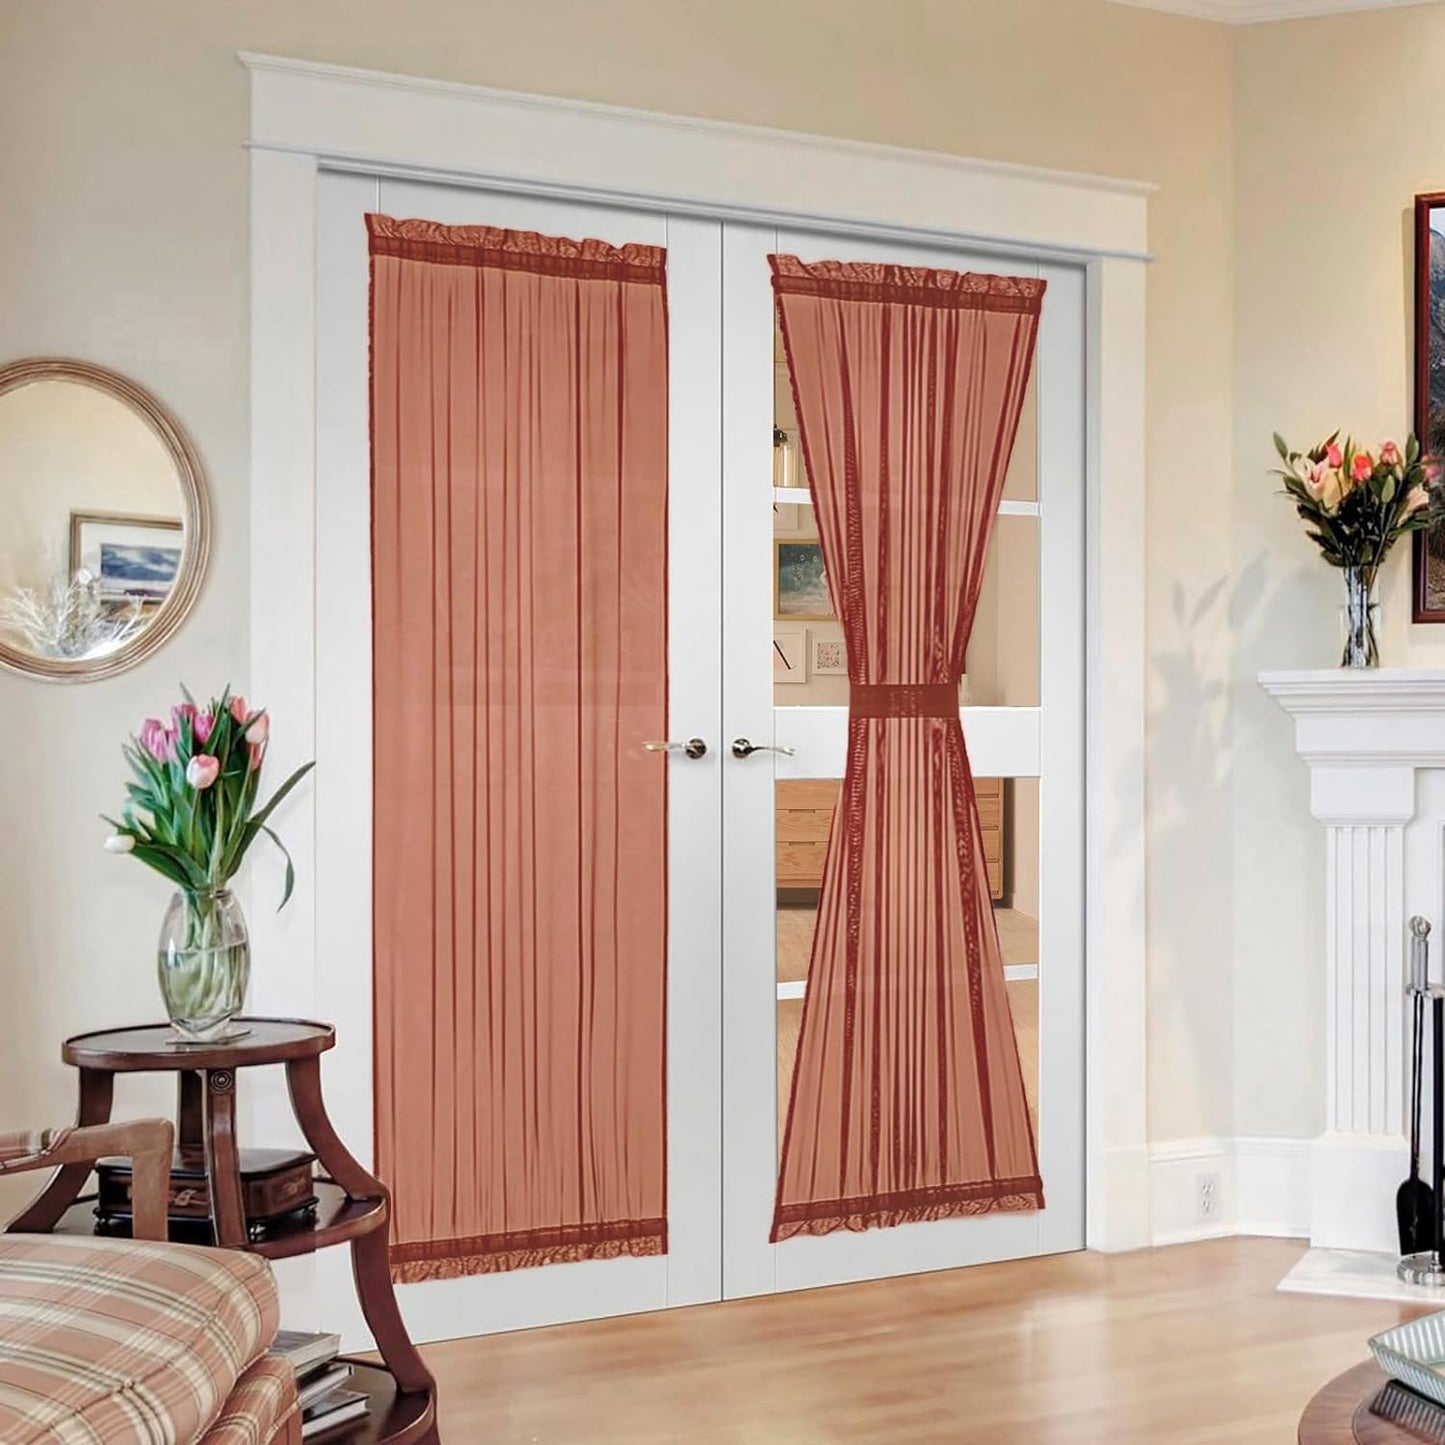 MIULEE French Door Sheer Curtains for Front Back Patio Glass Door Light Filtering Window Treatment with 2 Tiebacks 54 Wide and 72 Inches Length, White, Set of 2  MIULEE Burnt Orange 54"W X 72"L 